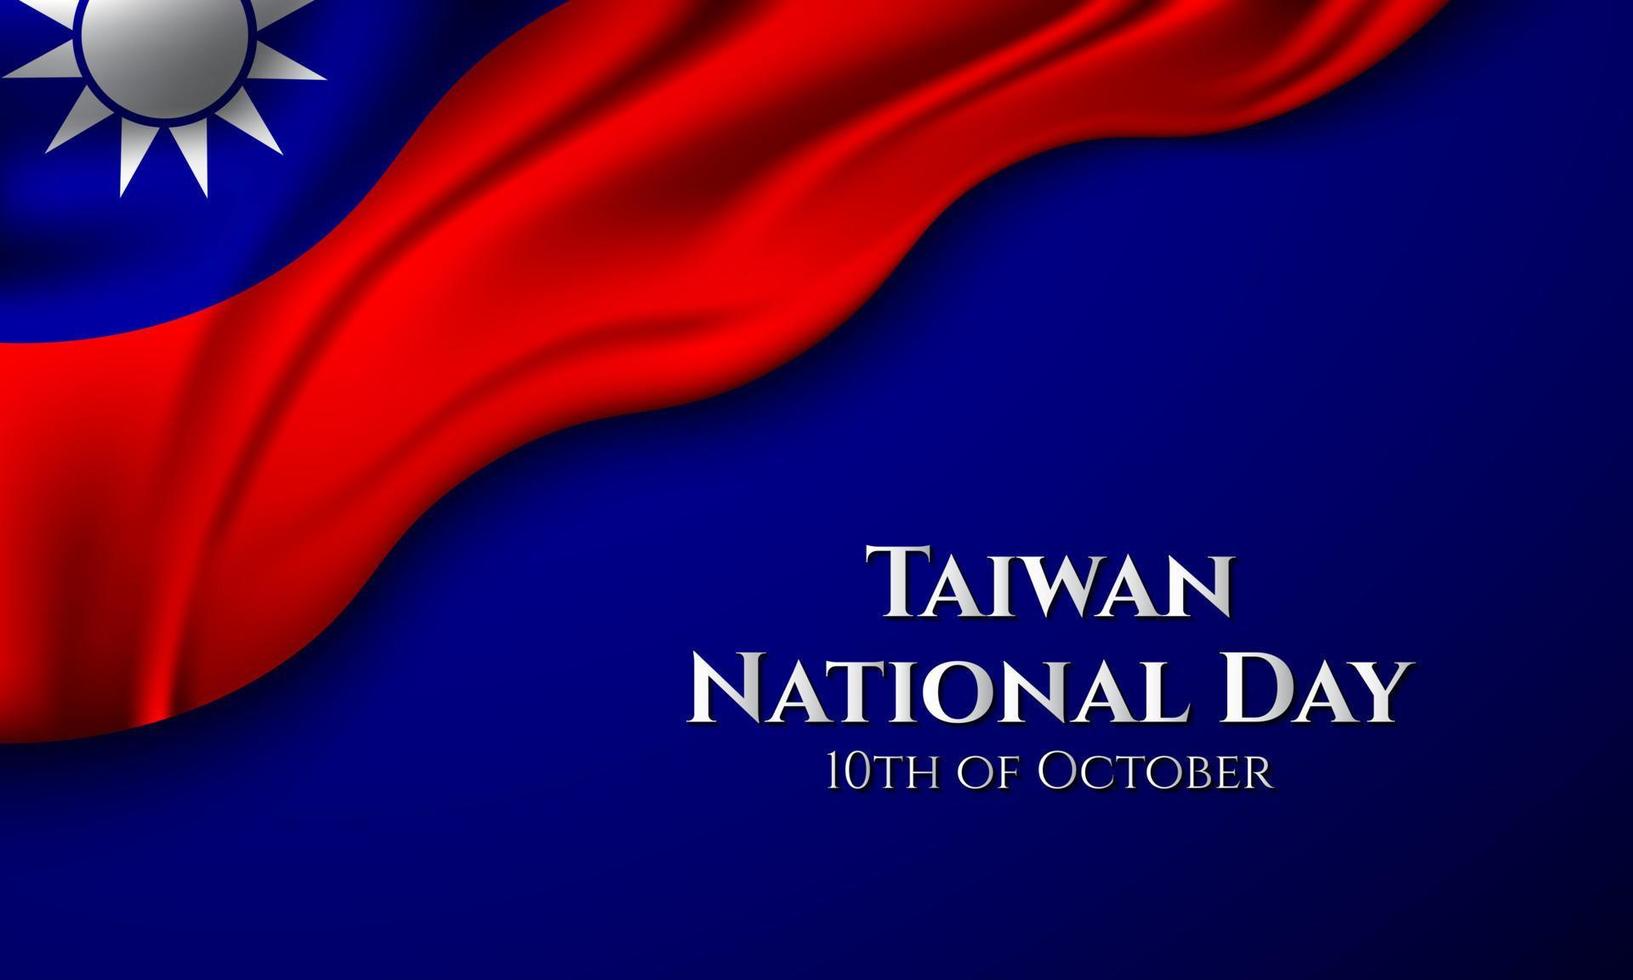 Taiwan National Day Background Design. Vector Illustration.